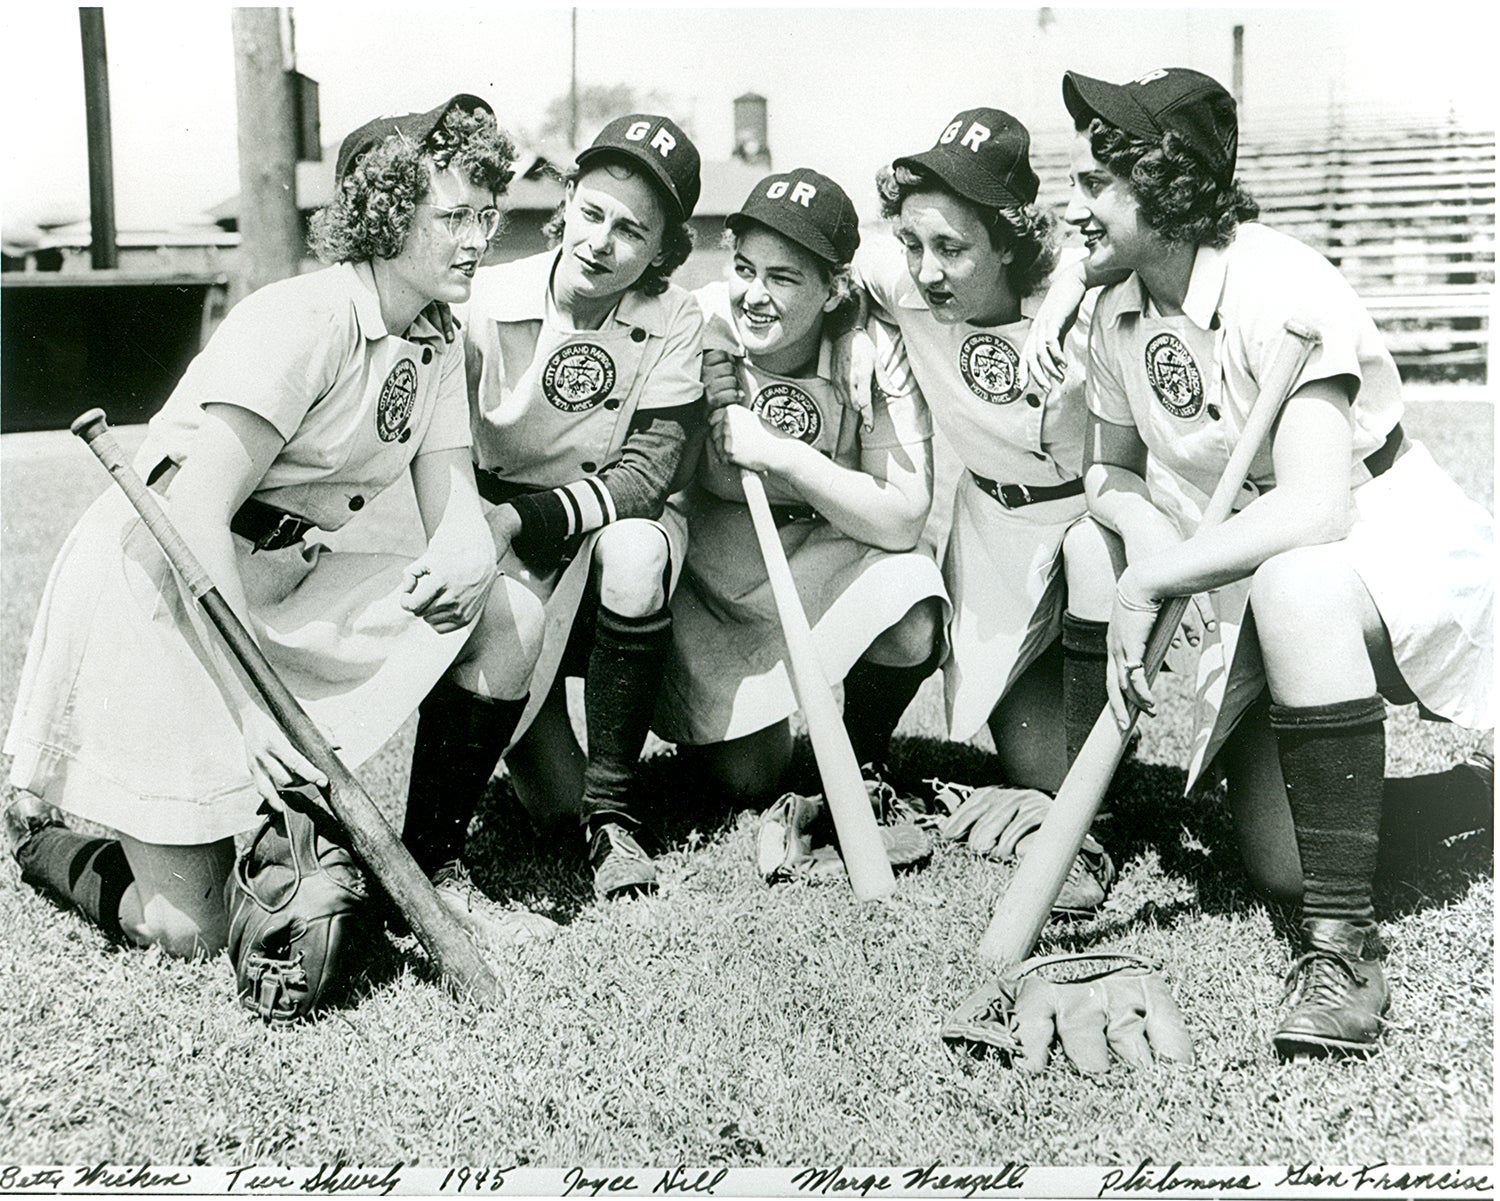 Women’s baseball history continued long after AAGPBL ended